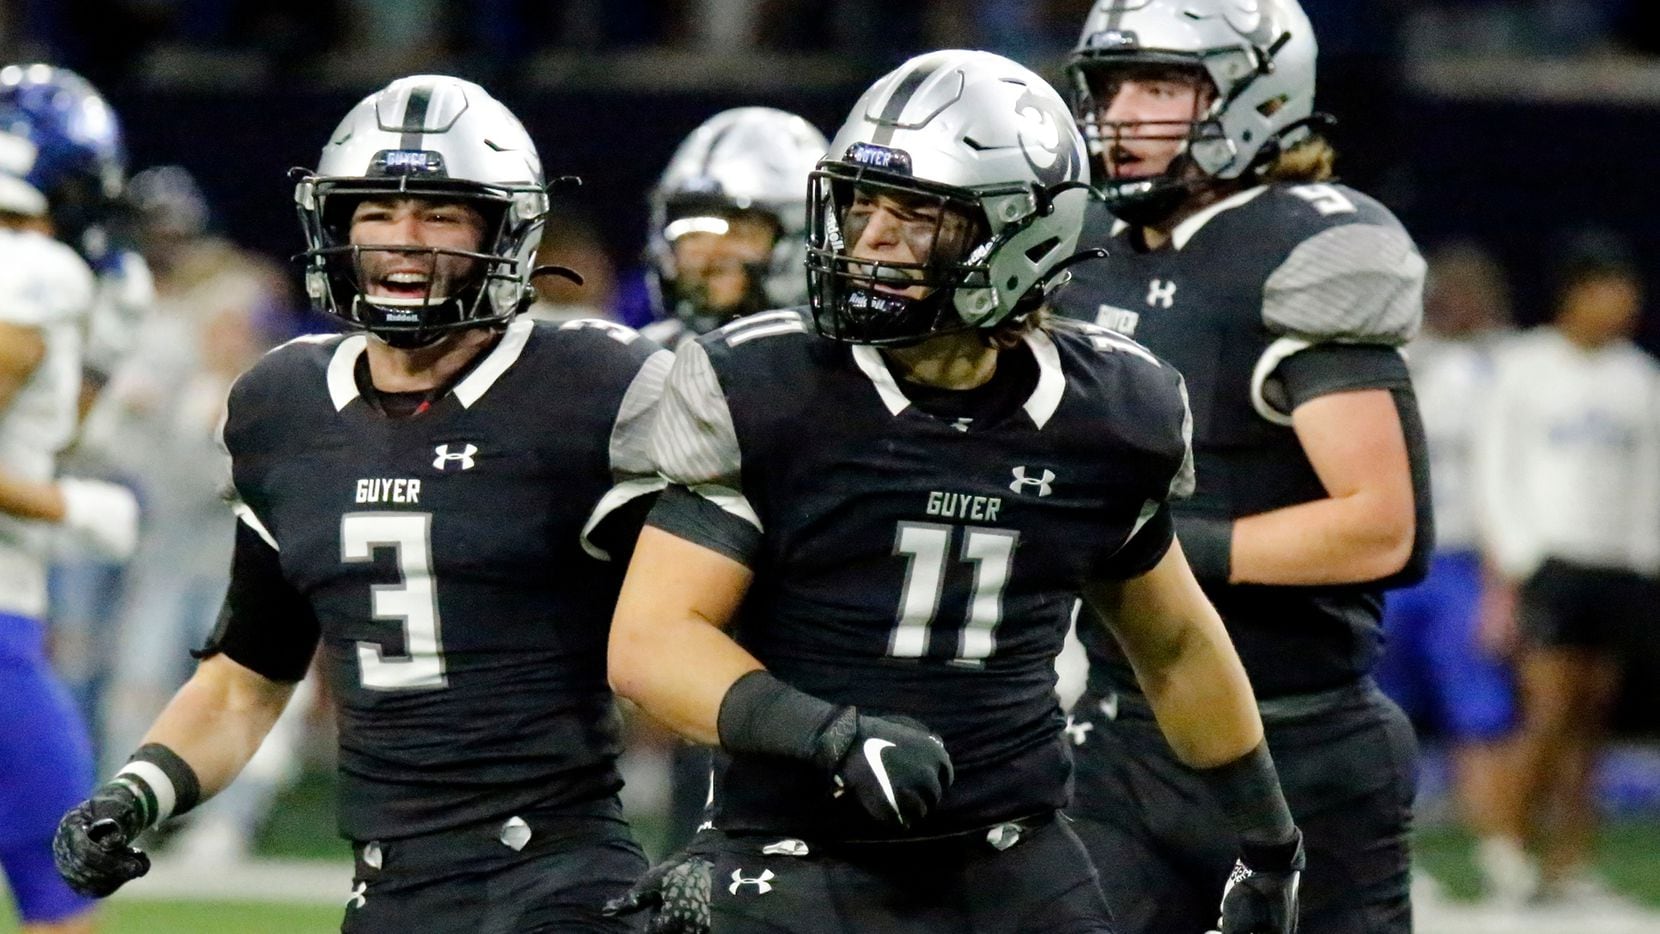 Guyer High School linebacker Carson Parham (11) celebrates his interception which would lead to a score during the first half as Denton Guyer High School played Trophy Club Byron Nelson High School in a Class 6A Division II Region I semifinal football game at The Ford Center in Frisco on Saturday, November 27, 2021.